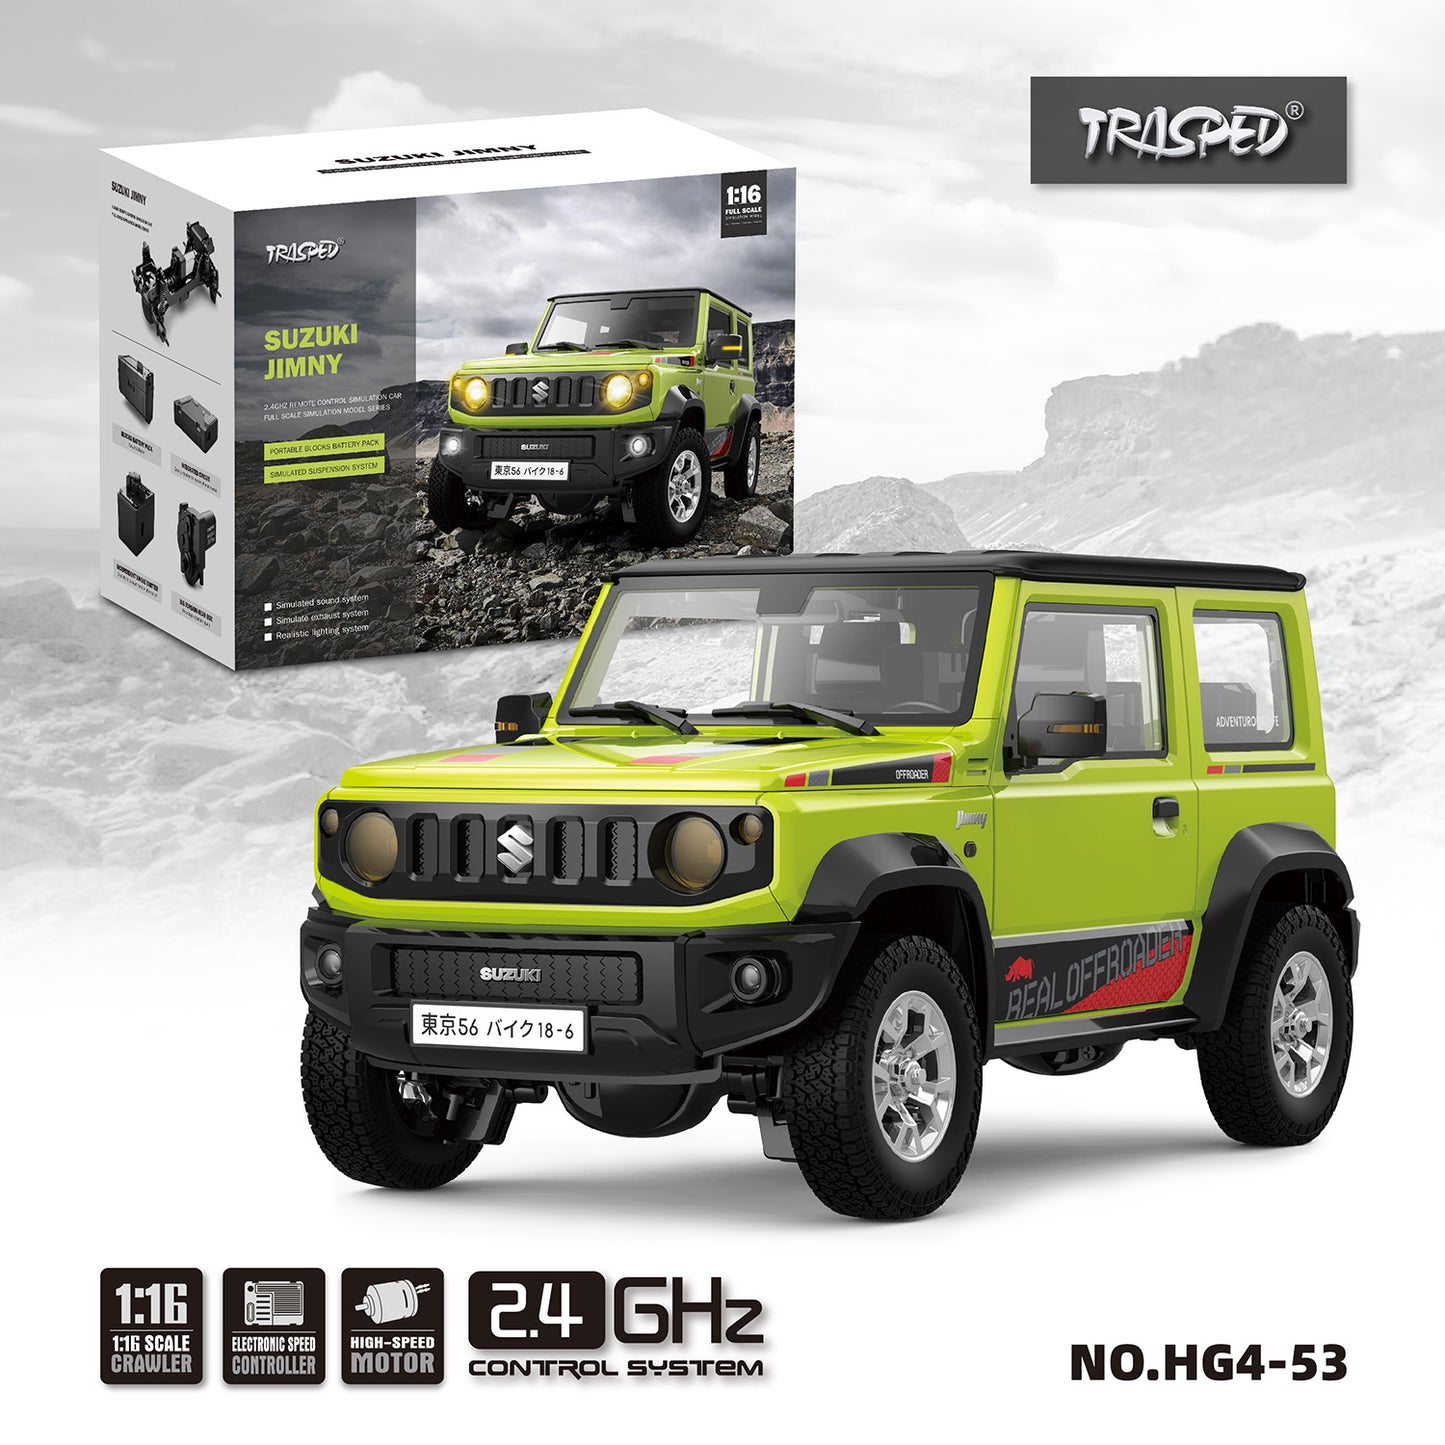 IN STOCK HG 1/16 4x3 RC Off-road Vehicles Electric Remote Controlled Crawler Climbing Car Sound Light Smoke Painted Assembled